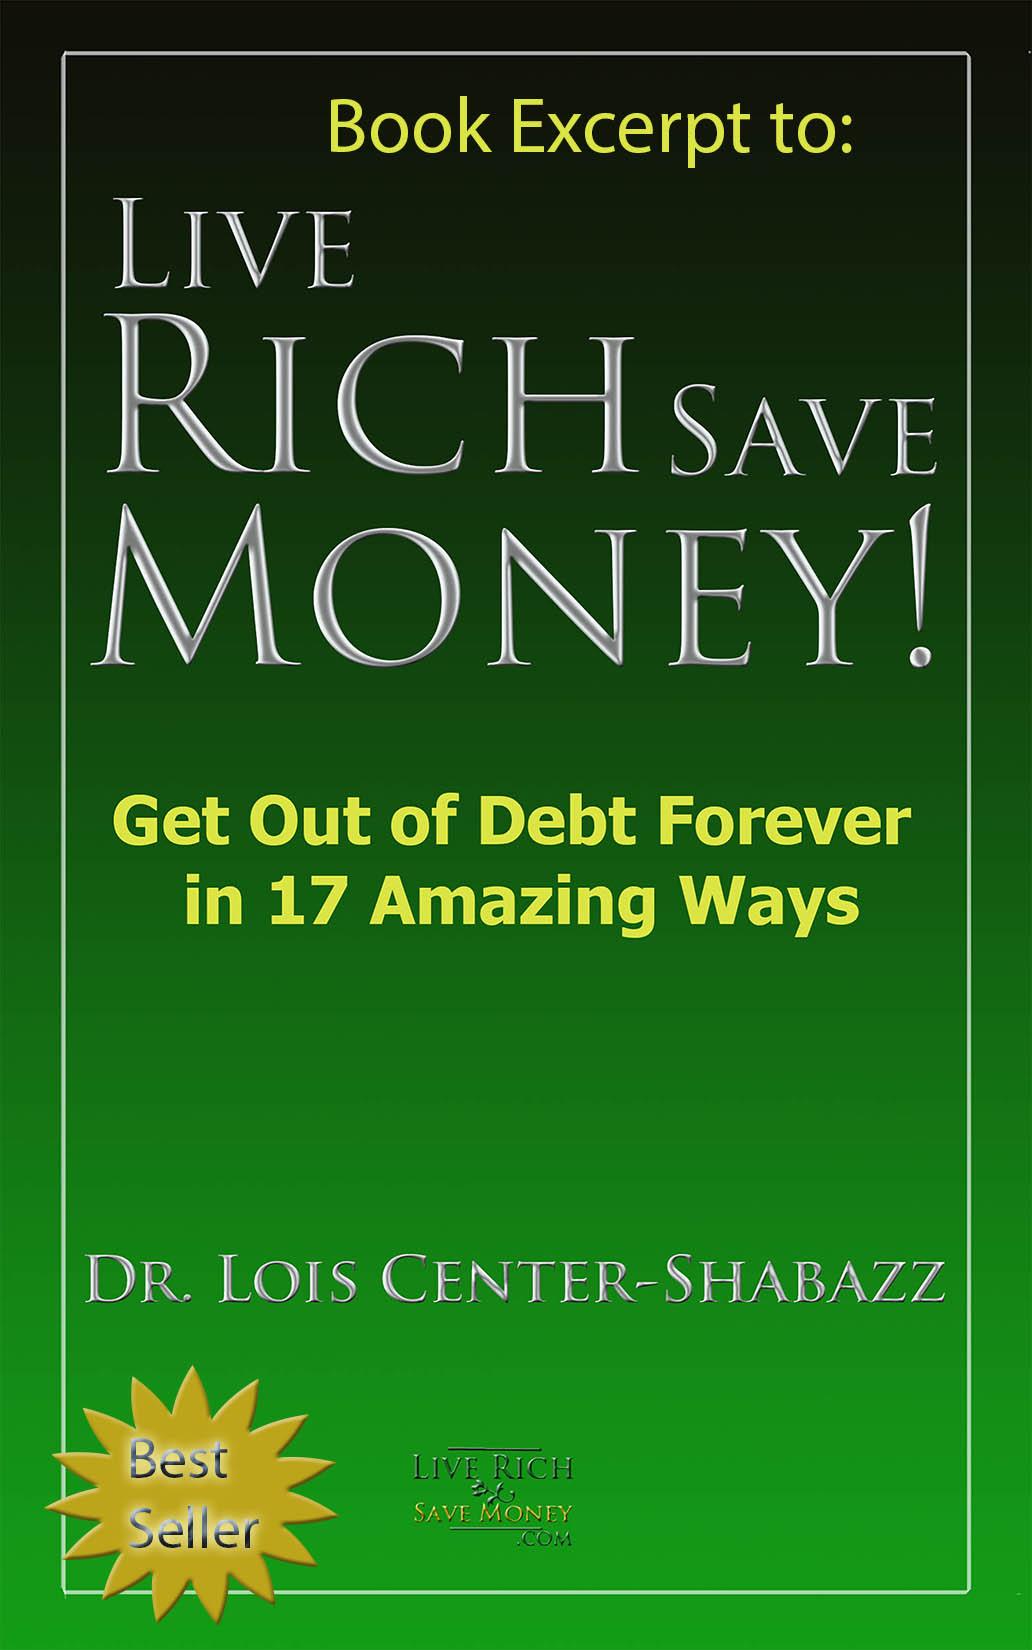 FREE: Live Rich Save Money! Get Out of Debt Forever in 17 Amazing Ways by Lois Center-Shabazz